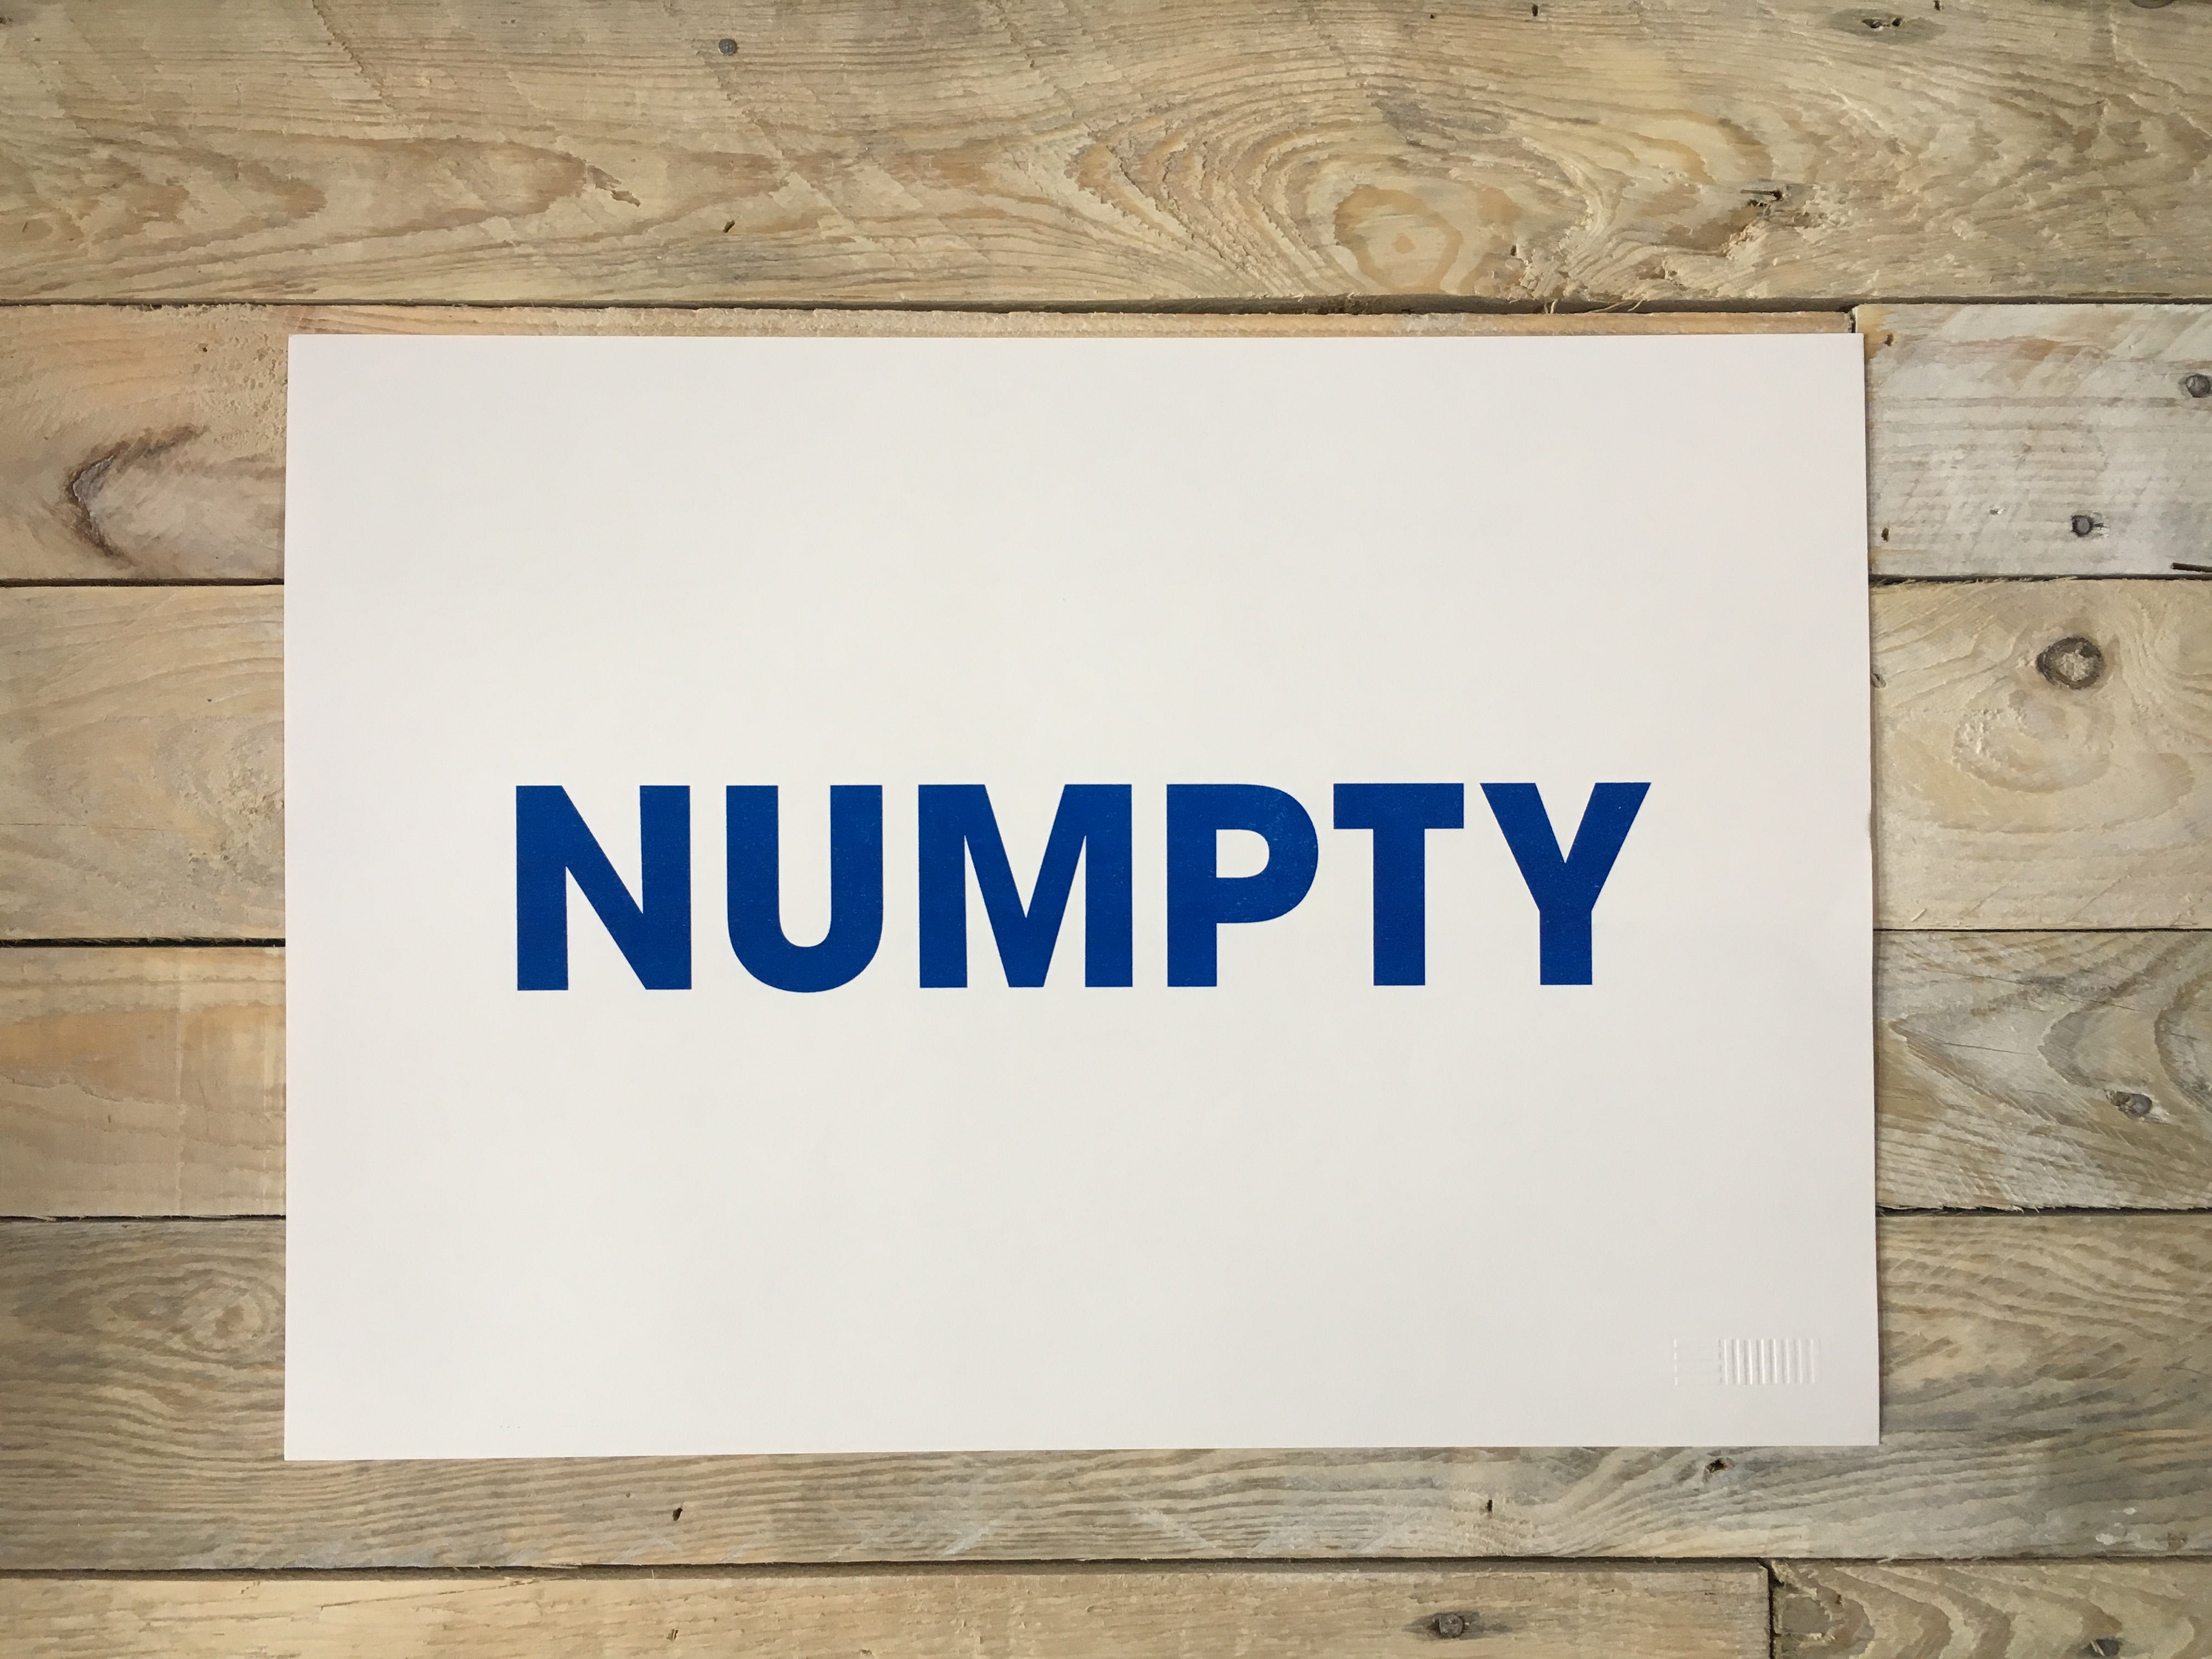 A3 NUMPTY RISO PRINT - POMPEY TYPE SERIES - foursandeights